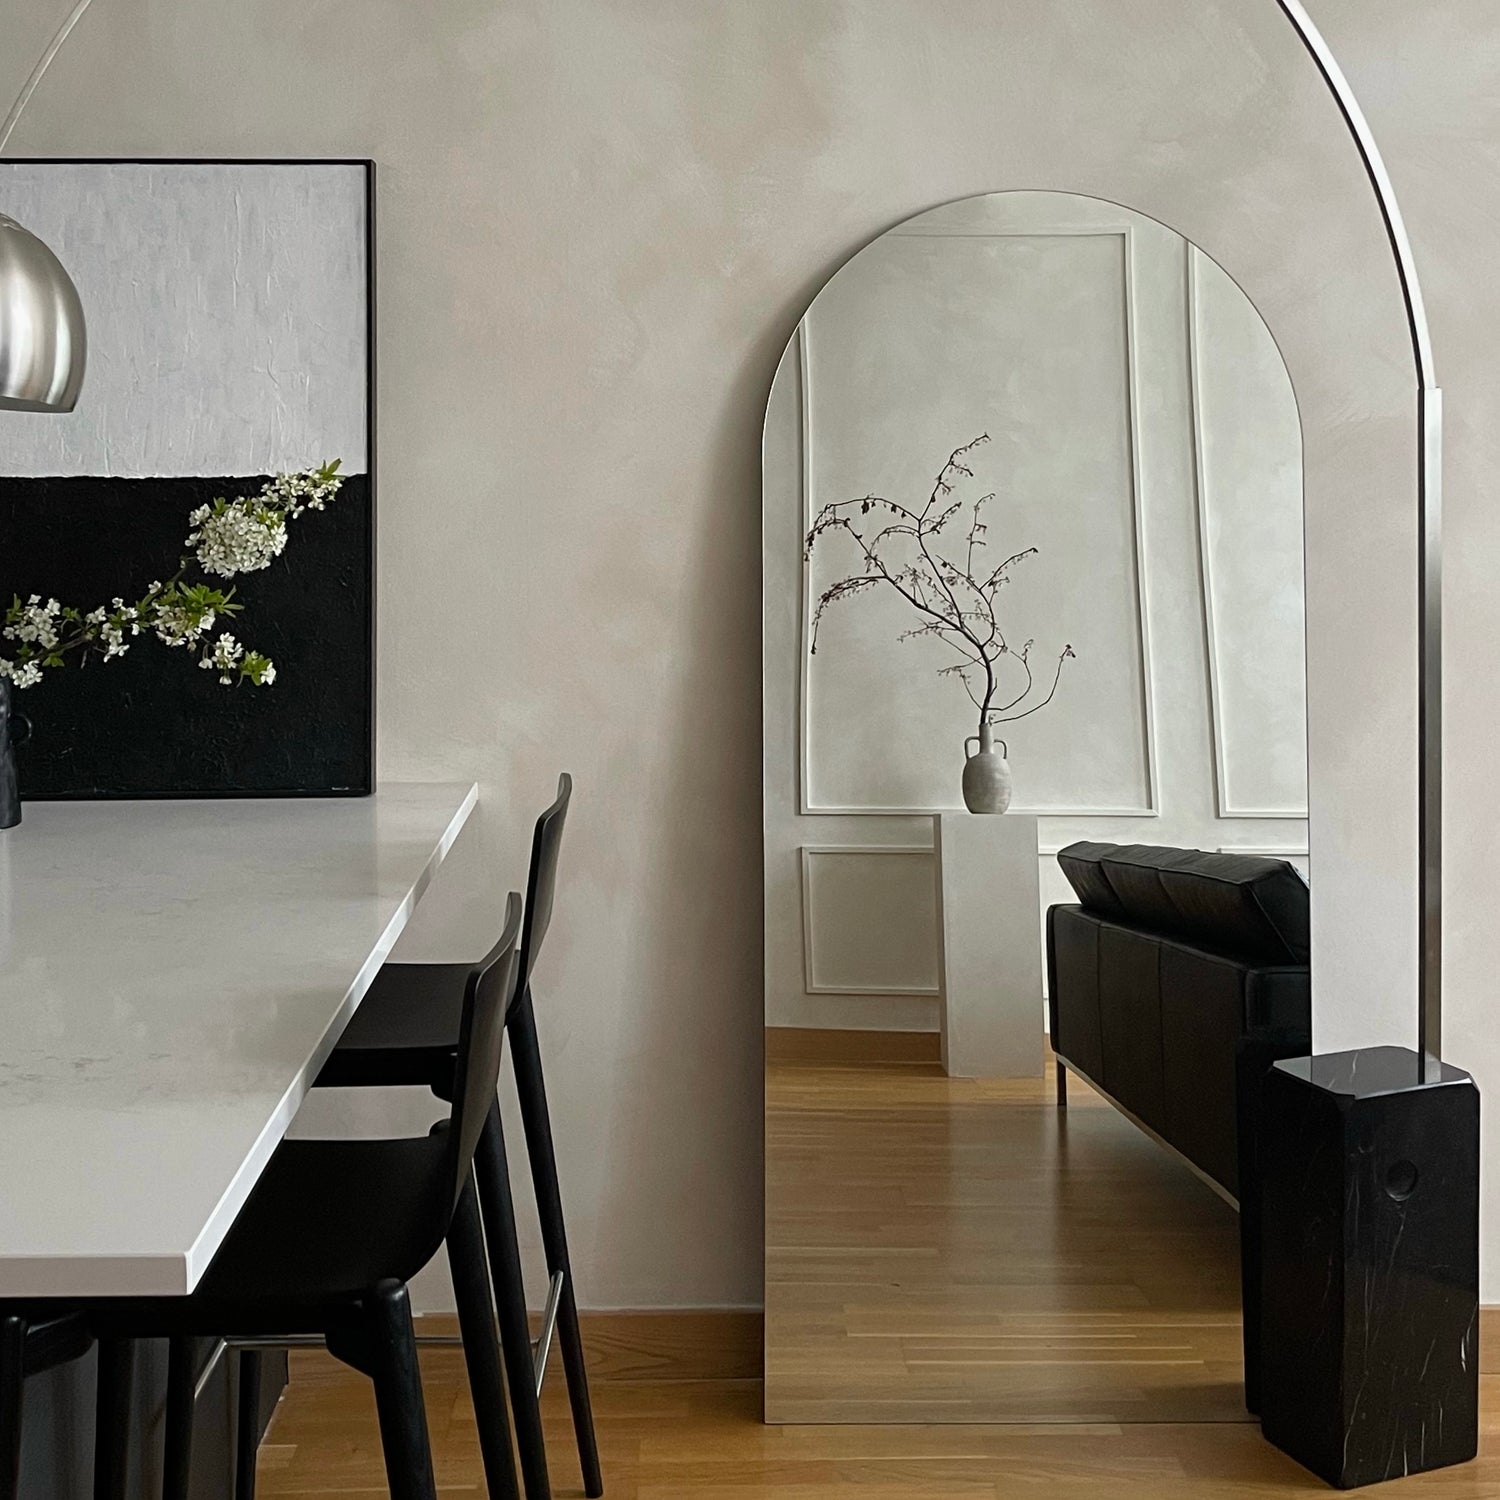 BEST SELLING MIRRORS OF MARCH THROUGH YOUR PICTURES